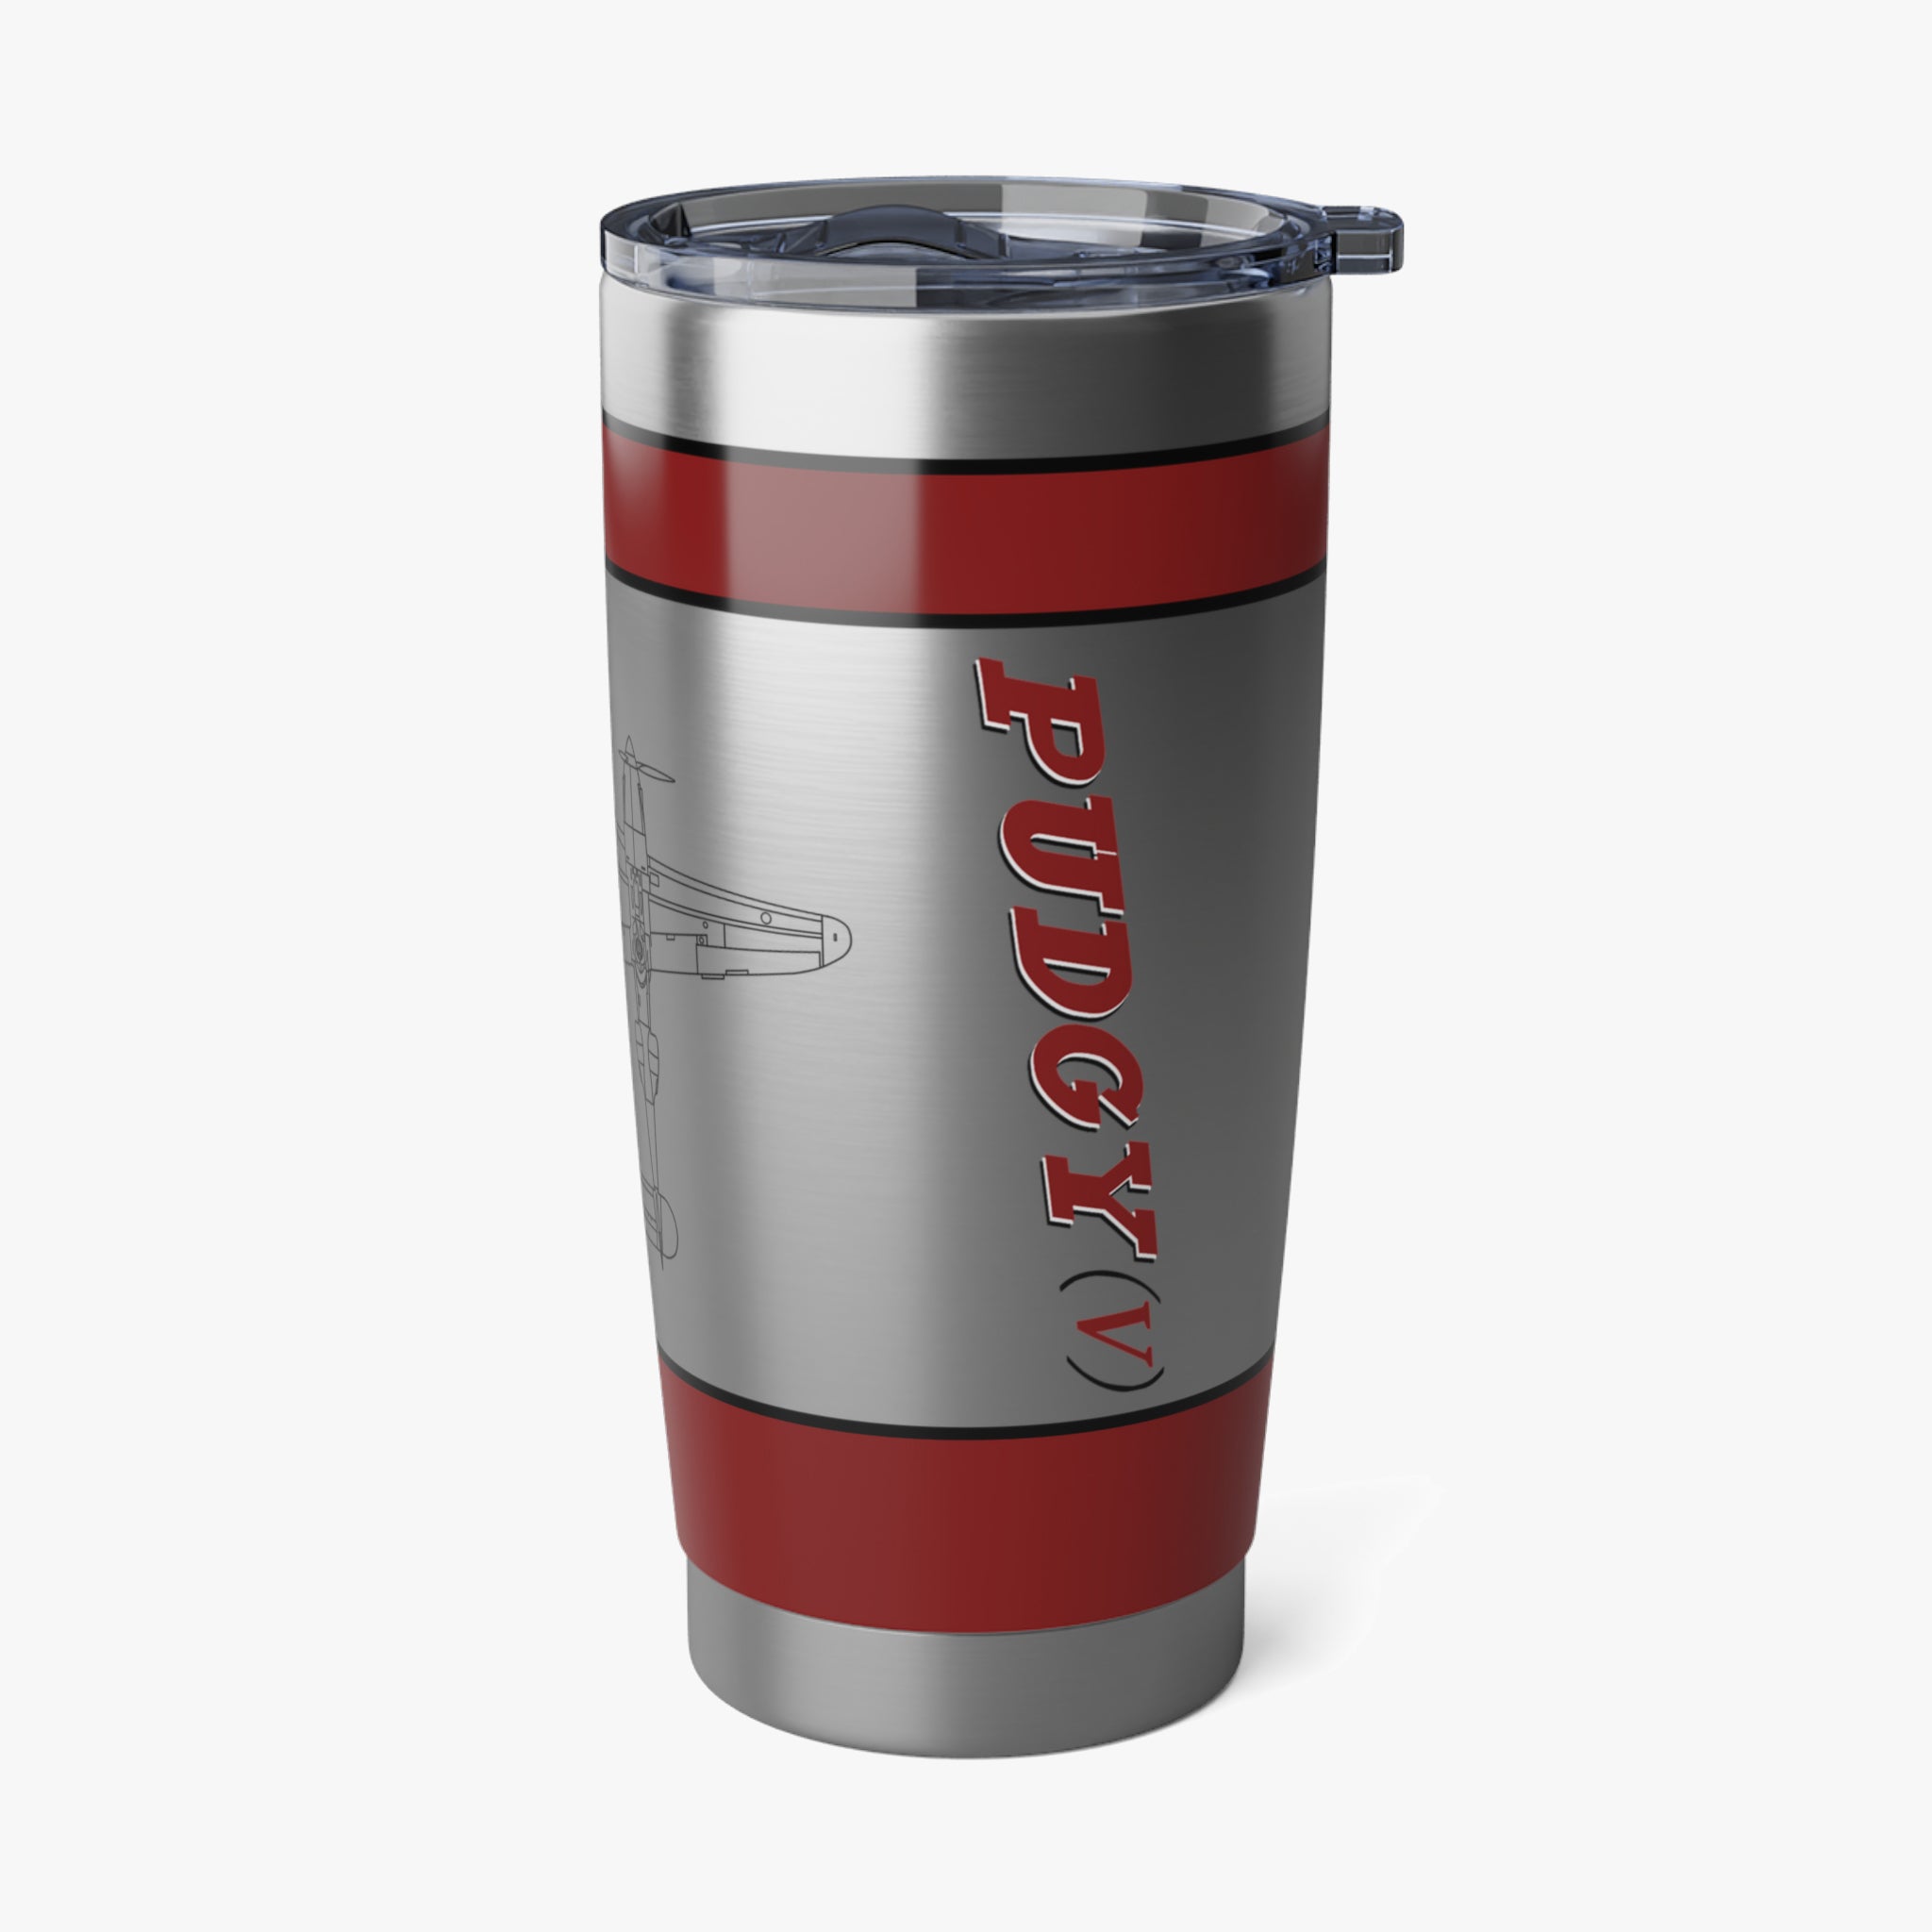 P-38 "Pudgy (V)" Inspired 20oz (590ml) Stainless Steel Tumbler - I Love a Hangar